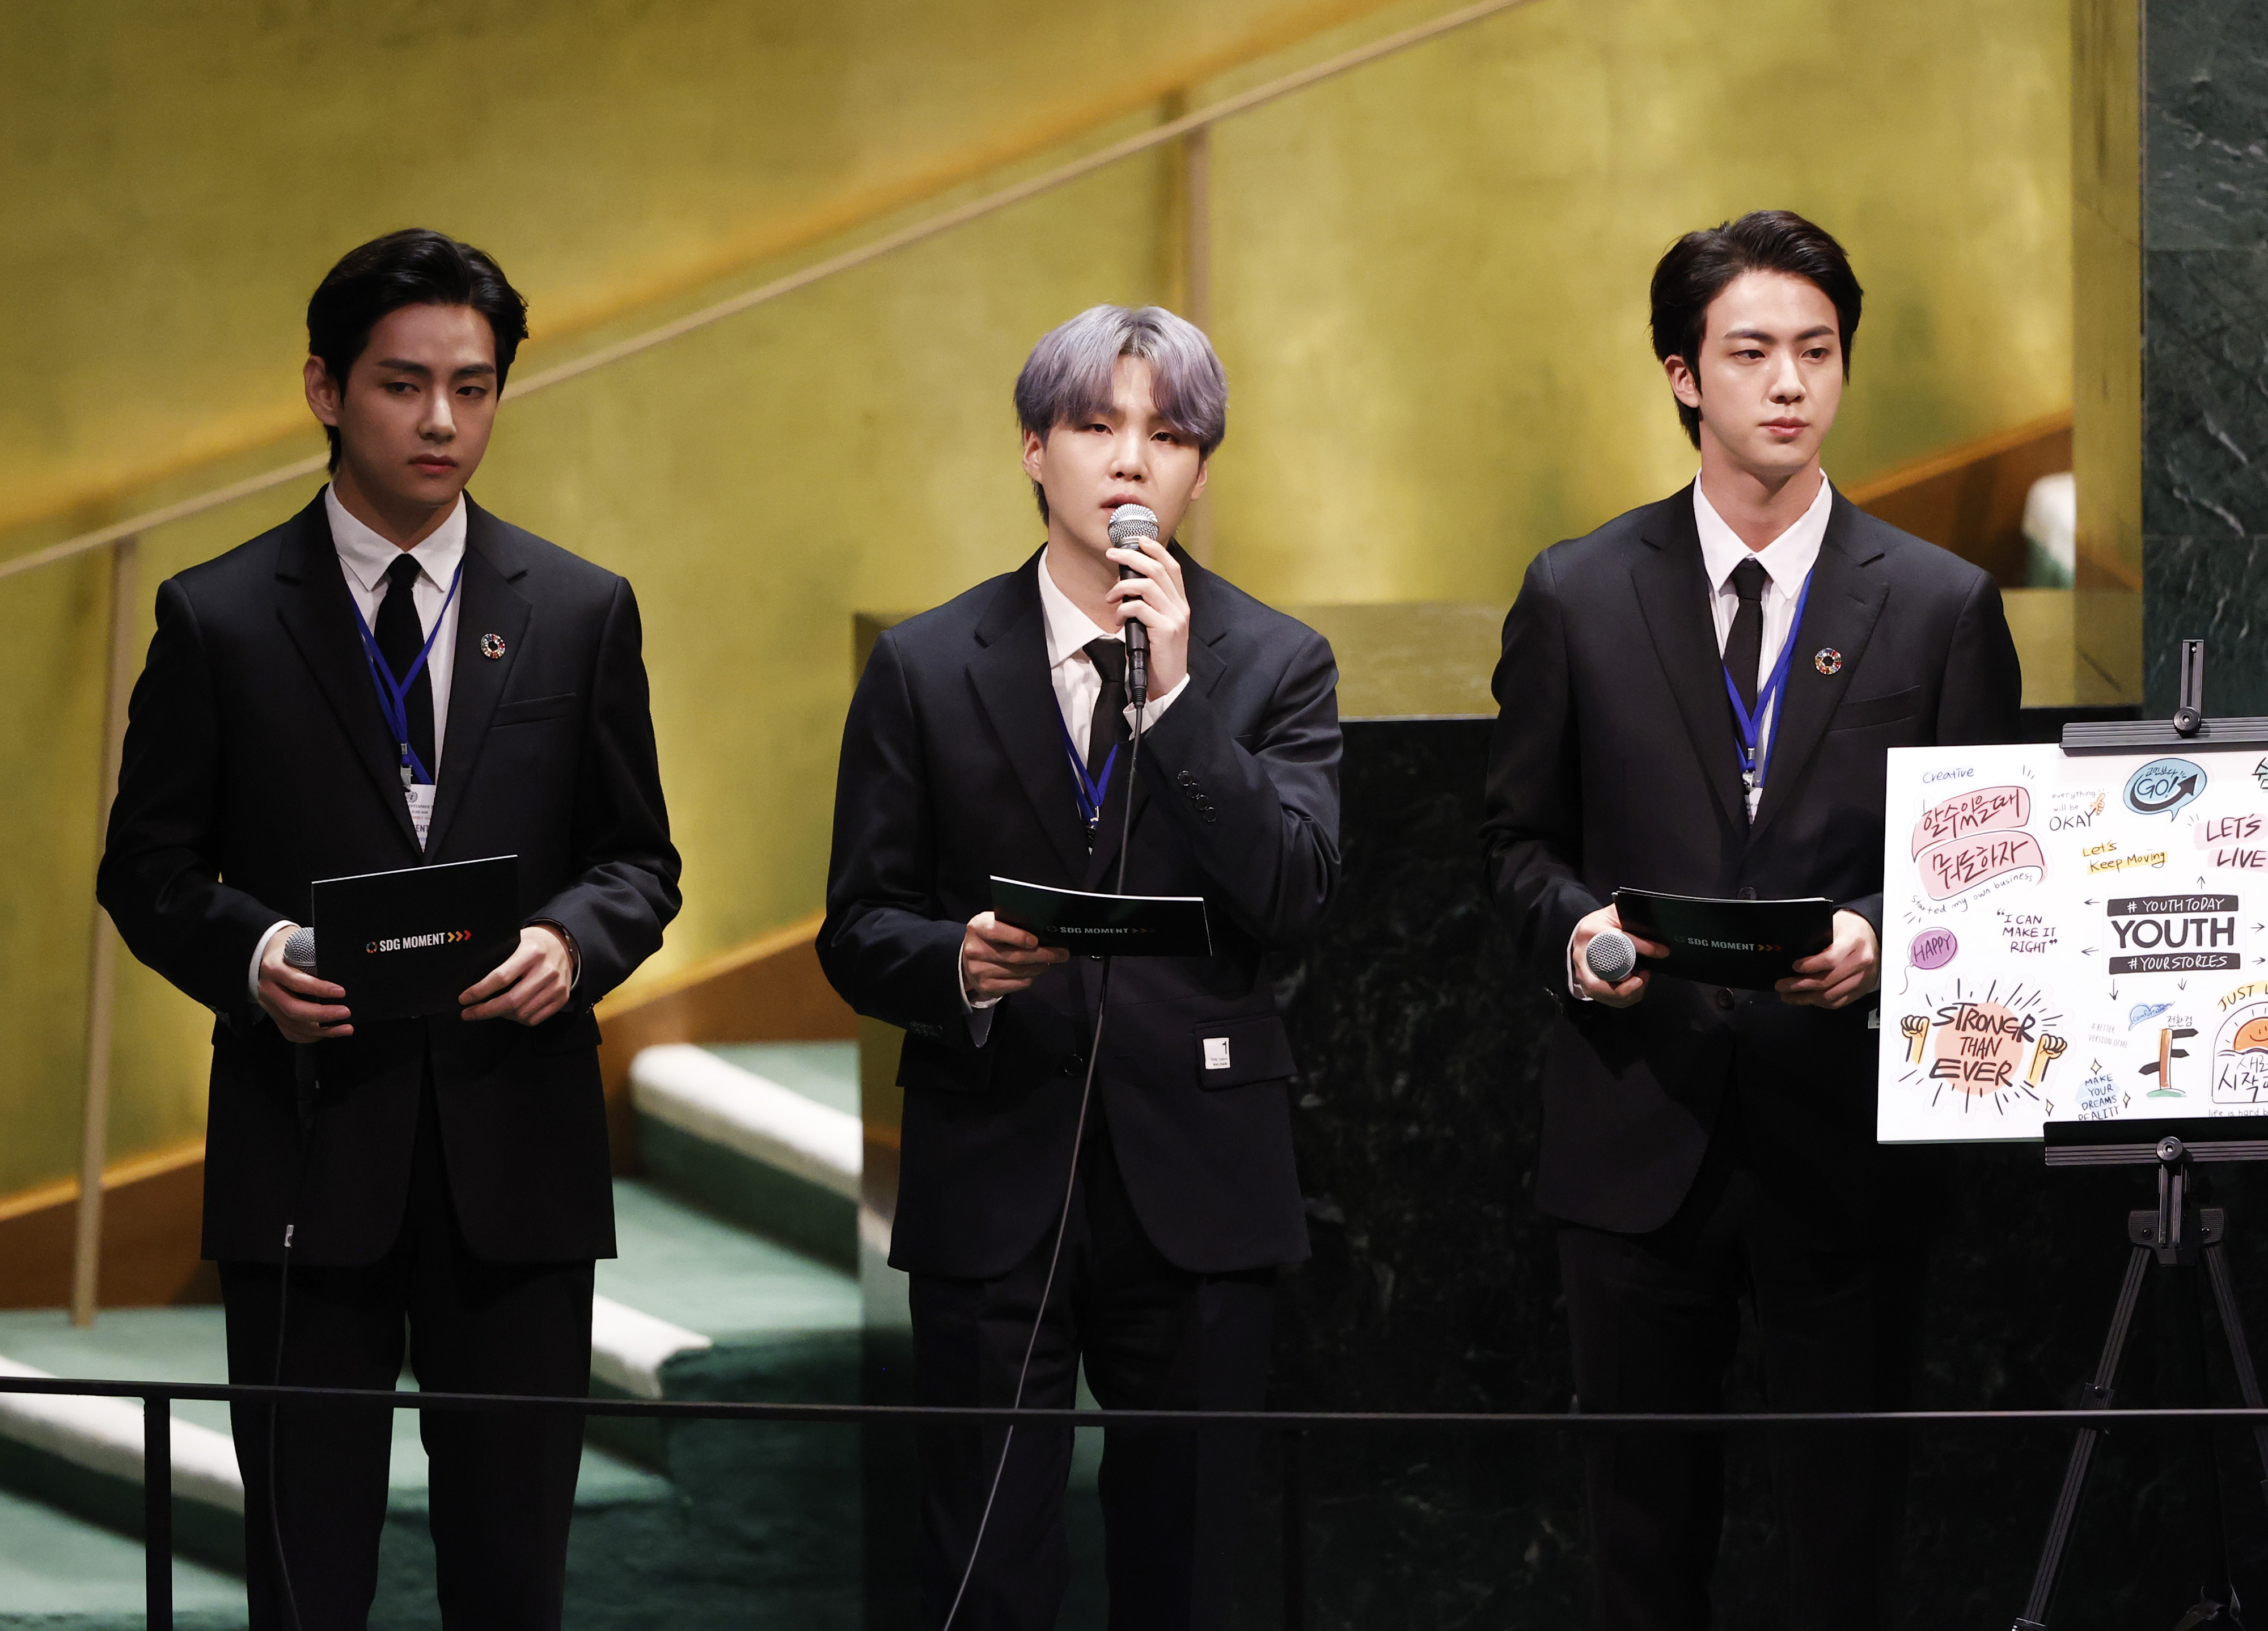 Taehyung/V, Suga, and Jin of boy band BTS take turns speaking at the SDG Moment event as part of the UN General Assembly